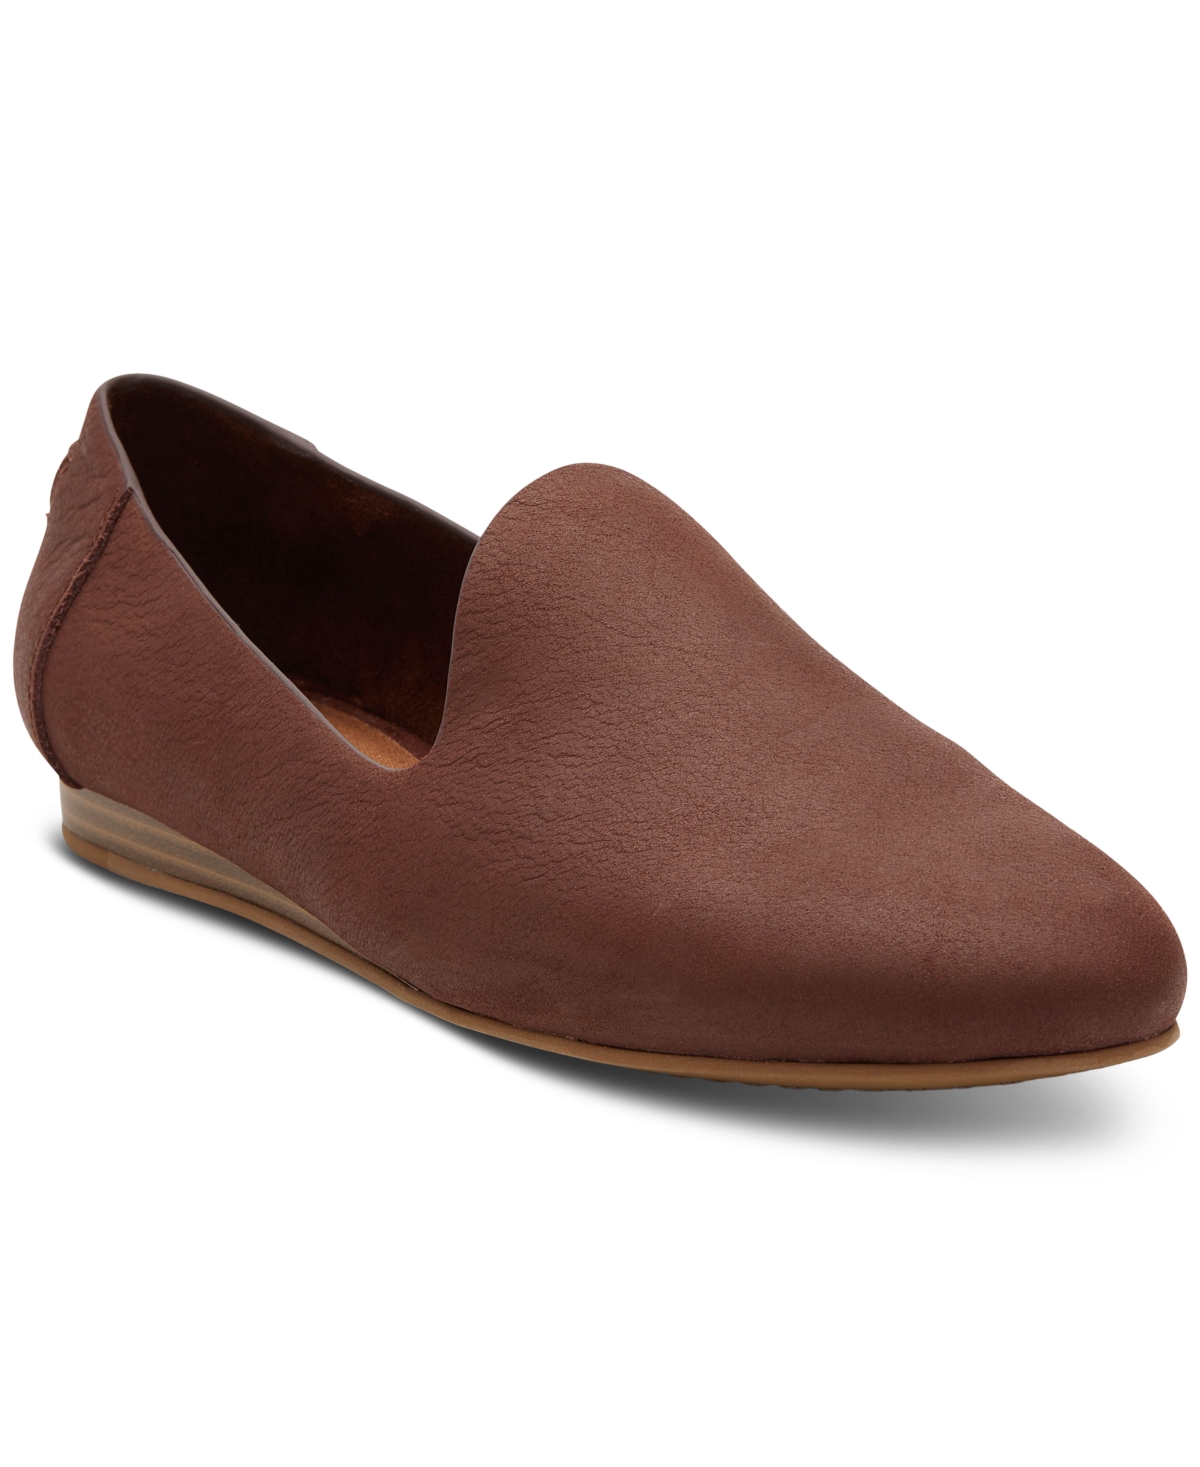 Toms Women's Darcy Slip-on Loafers In Chestnut Leather